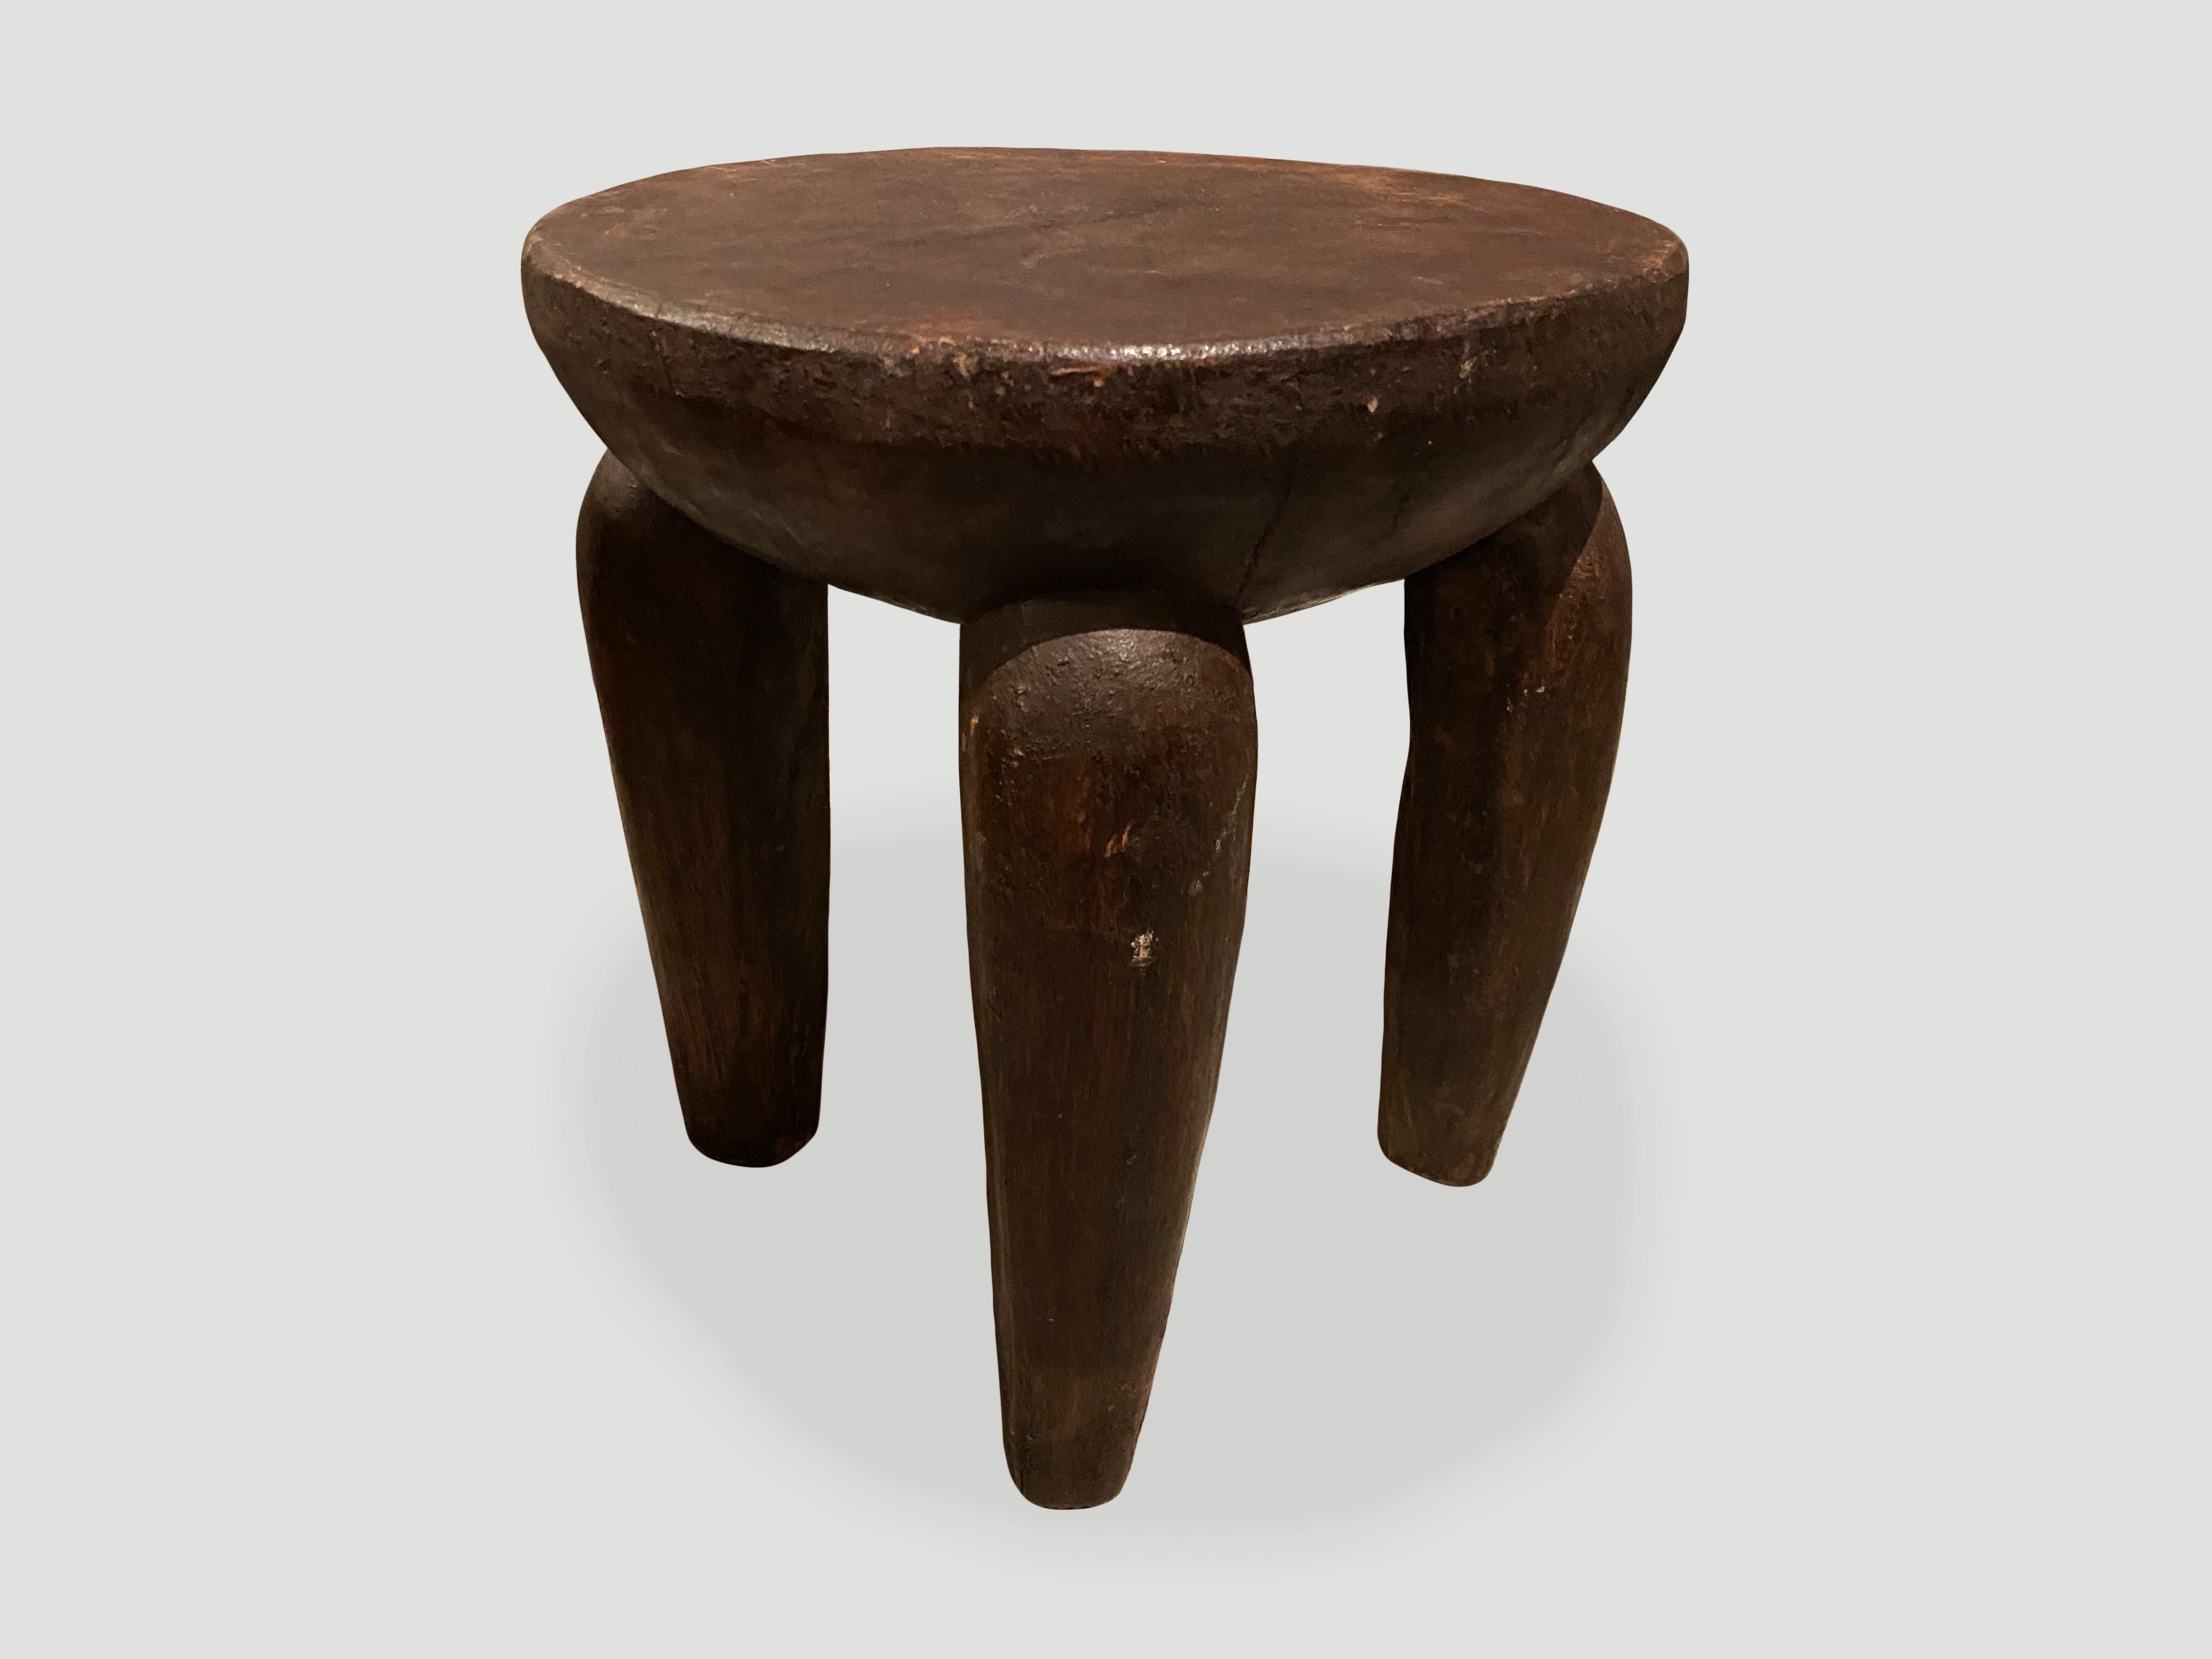 Antique African side table or stool hand carved from a single block of mahogany wood. The top is a thick bevel with beautiful hand carved legs and lovely patina. We only source the best.

This side table or stool was sourced in the spirit of